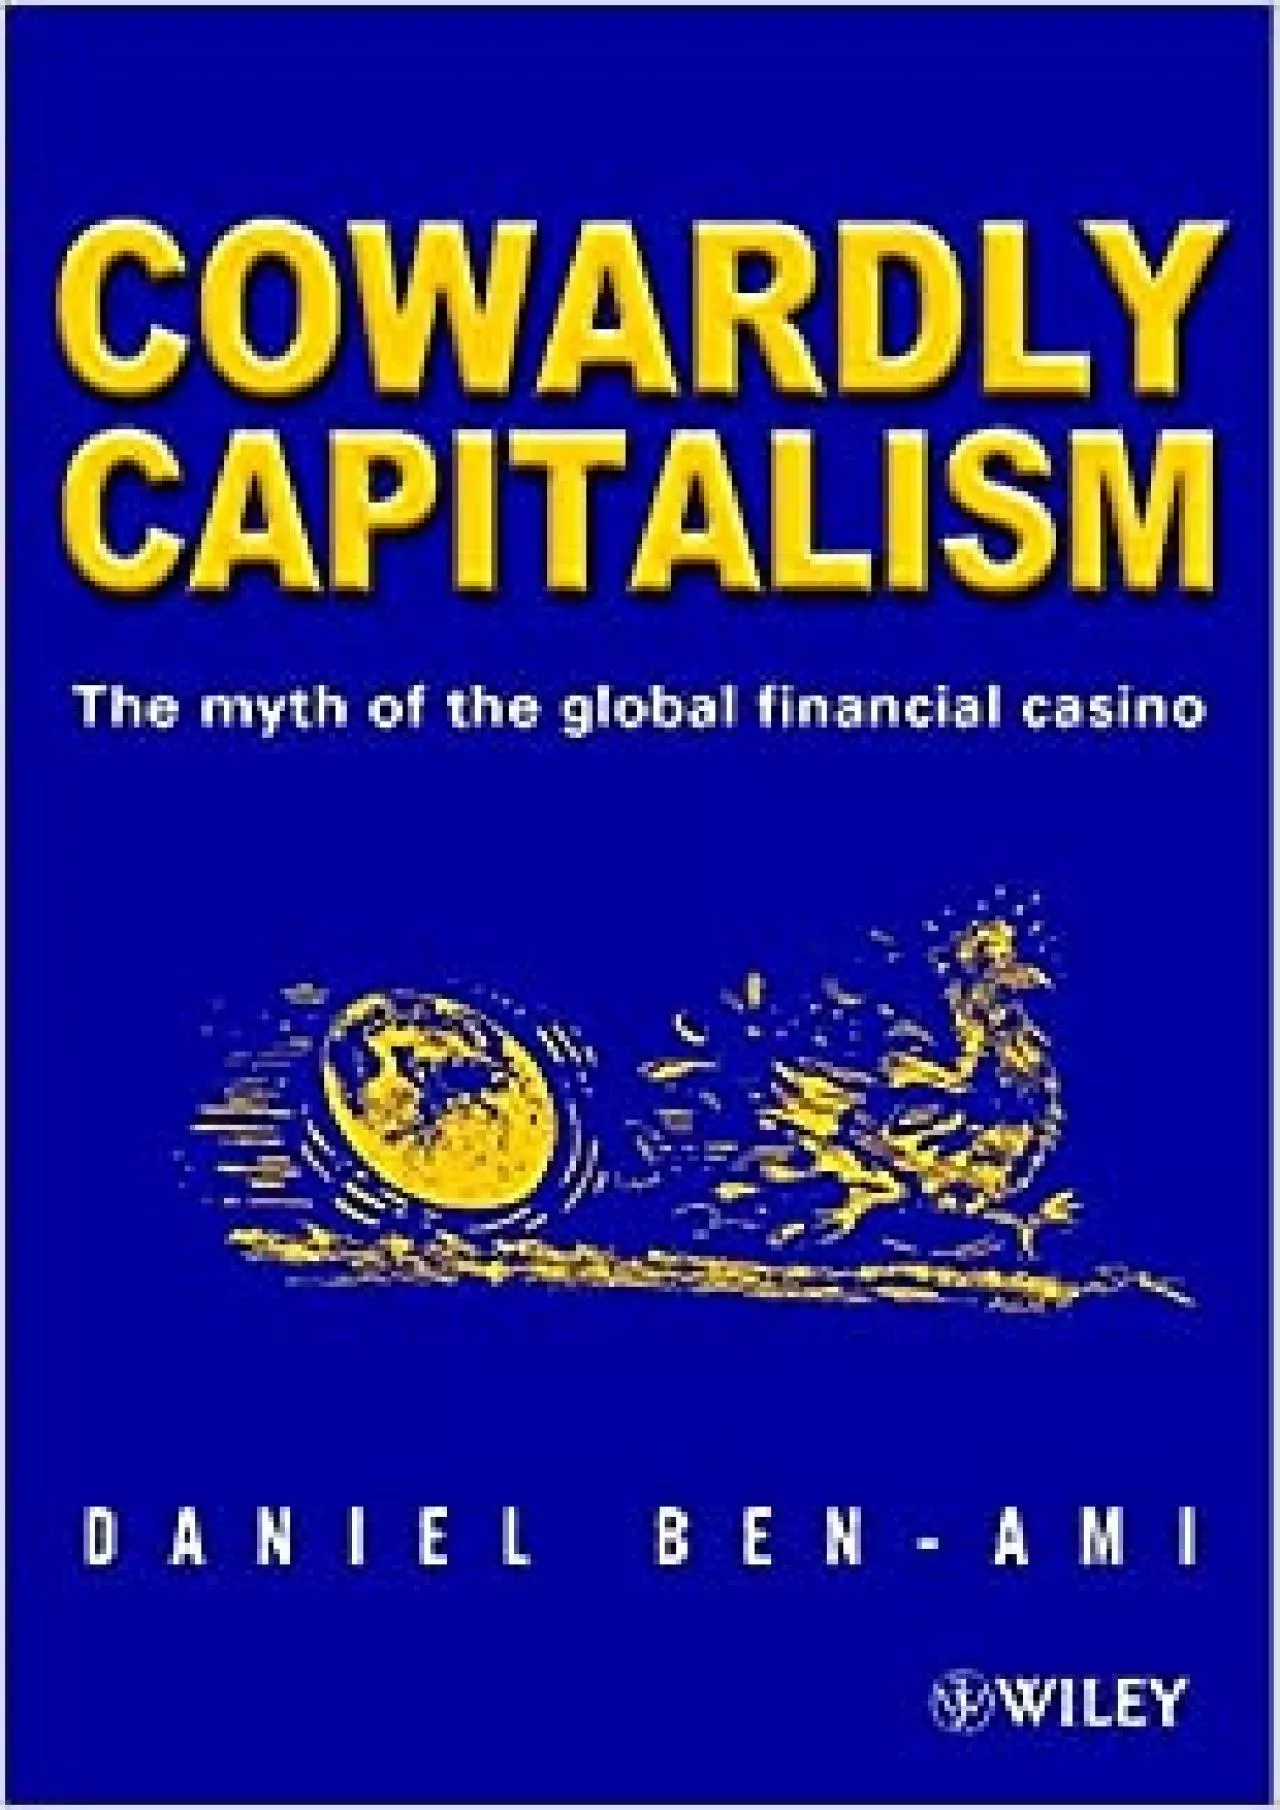 Cowardly Capitalism: The Myth of The Global Financial Casino